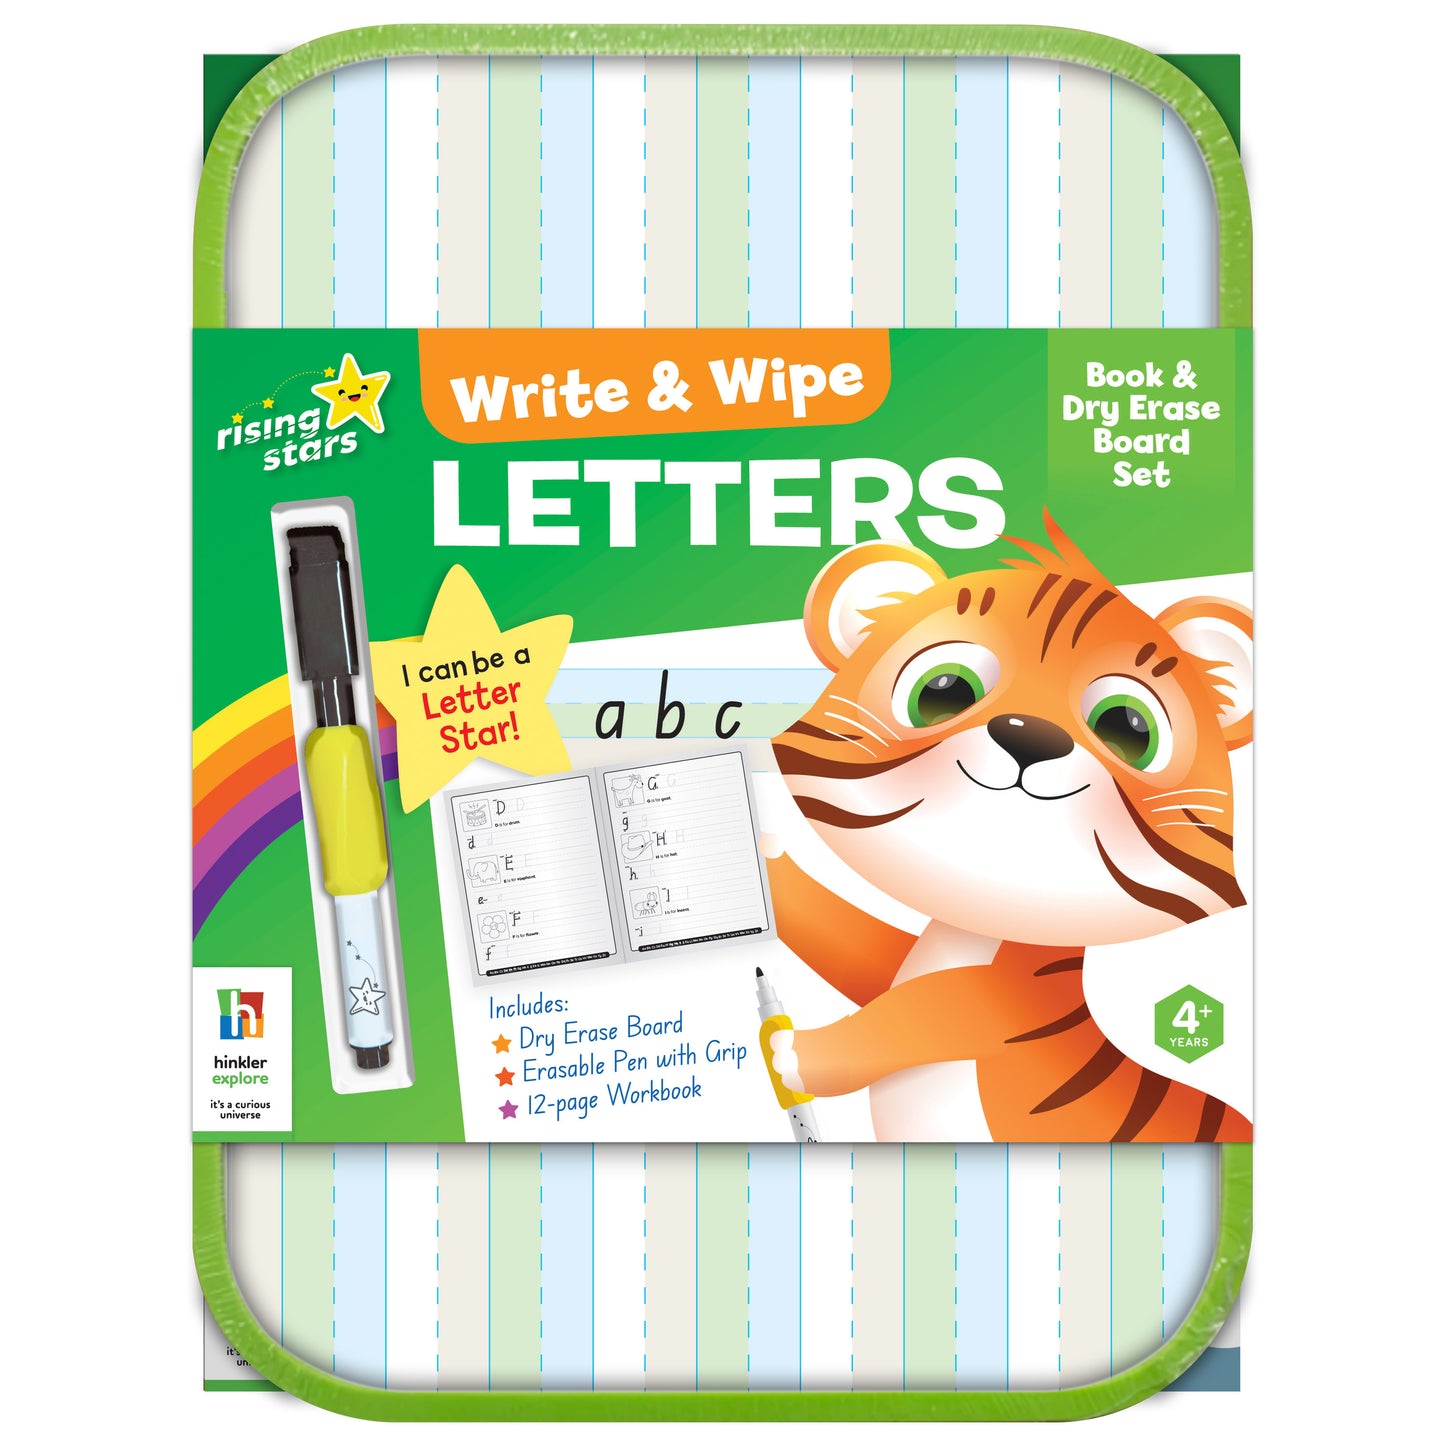 Write and Wipe Letter